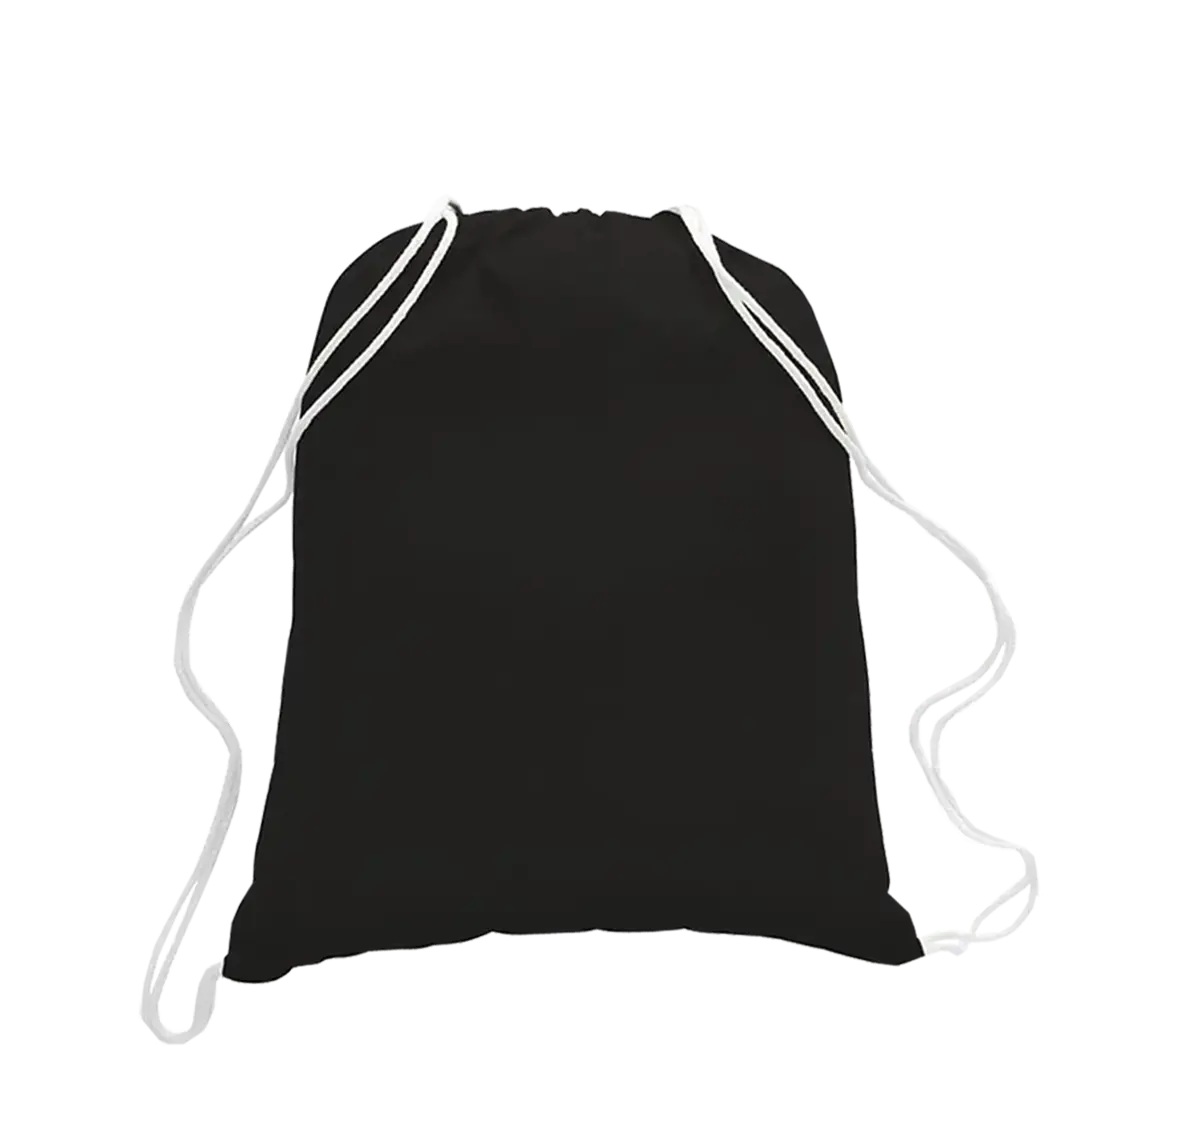 Cotton String Backpack Draw string Bag Material hergestellt in Indien West Bengal Farbe schwarz